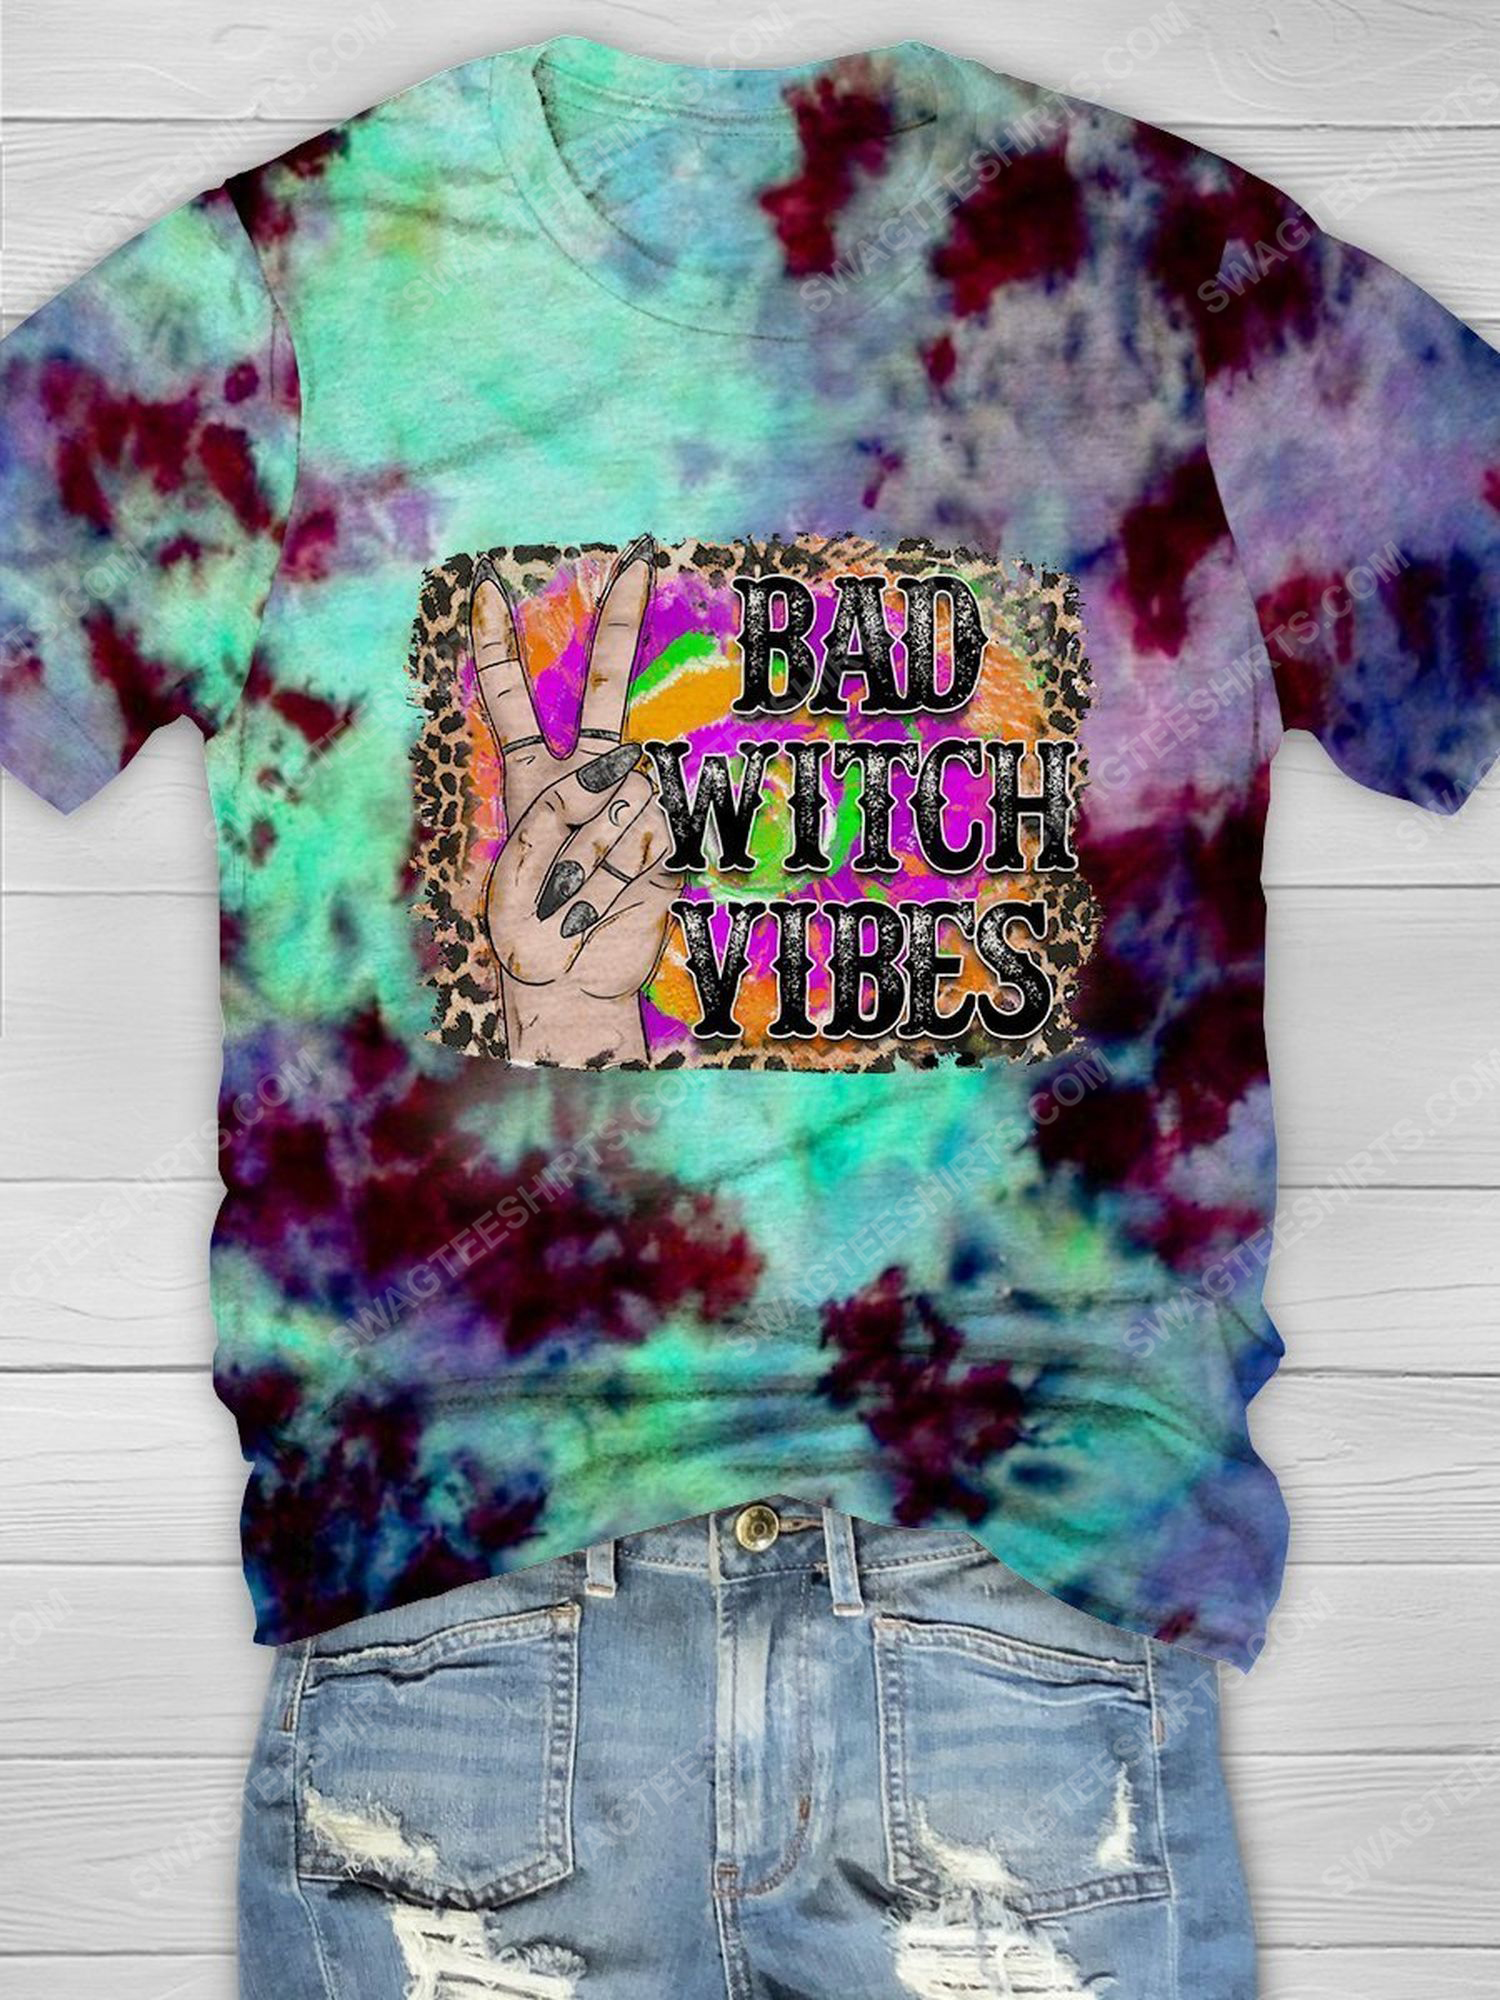 Halloween bad witch vibes tie dye shirt 1 - Copy (3)